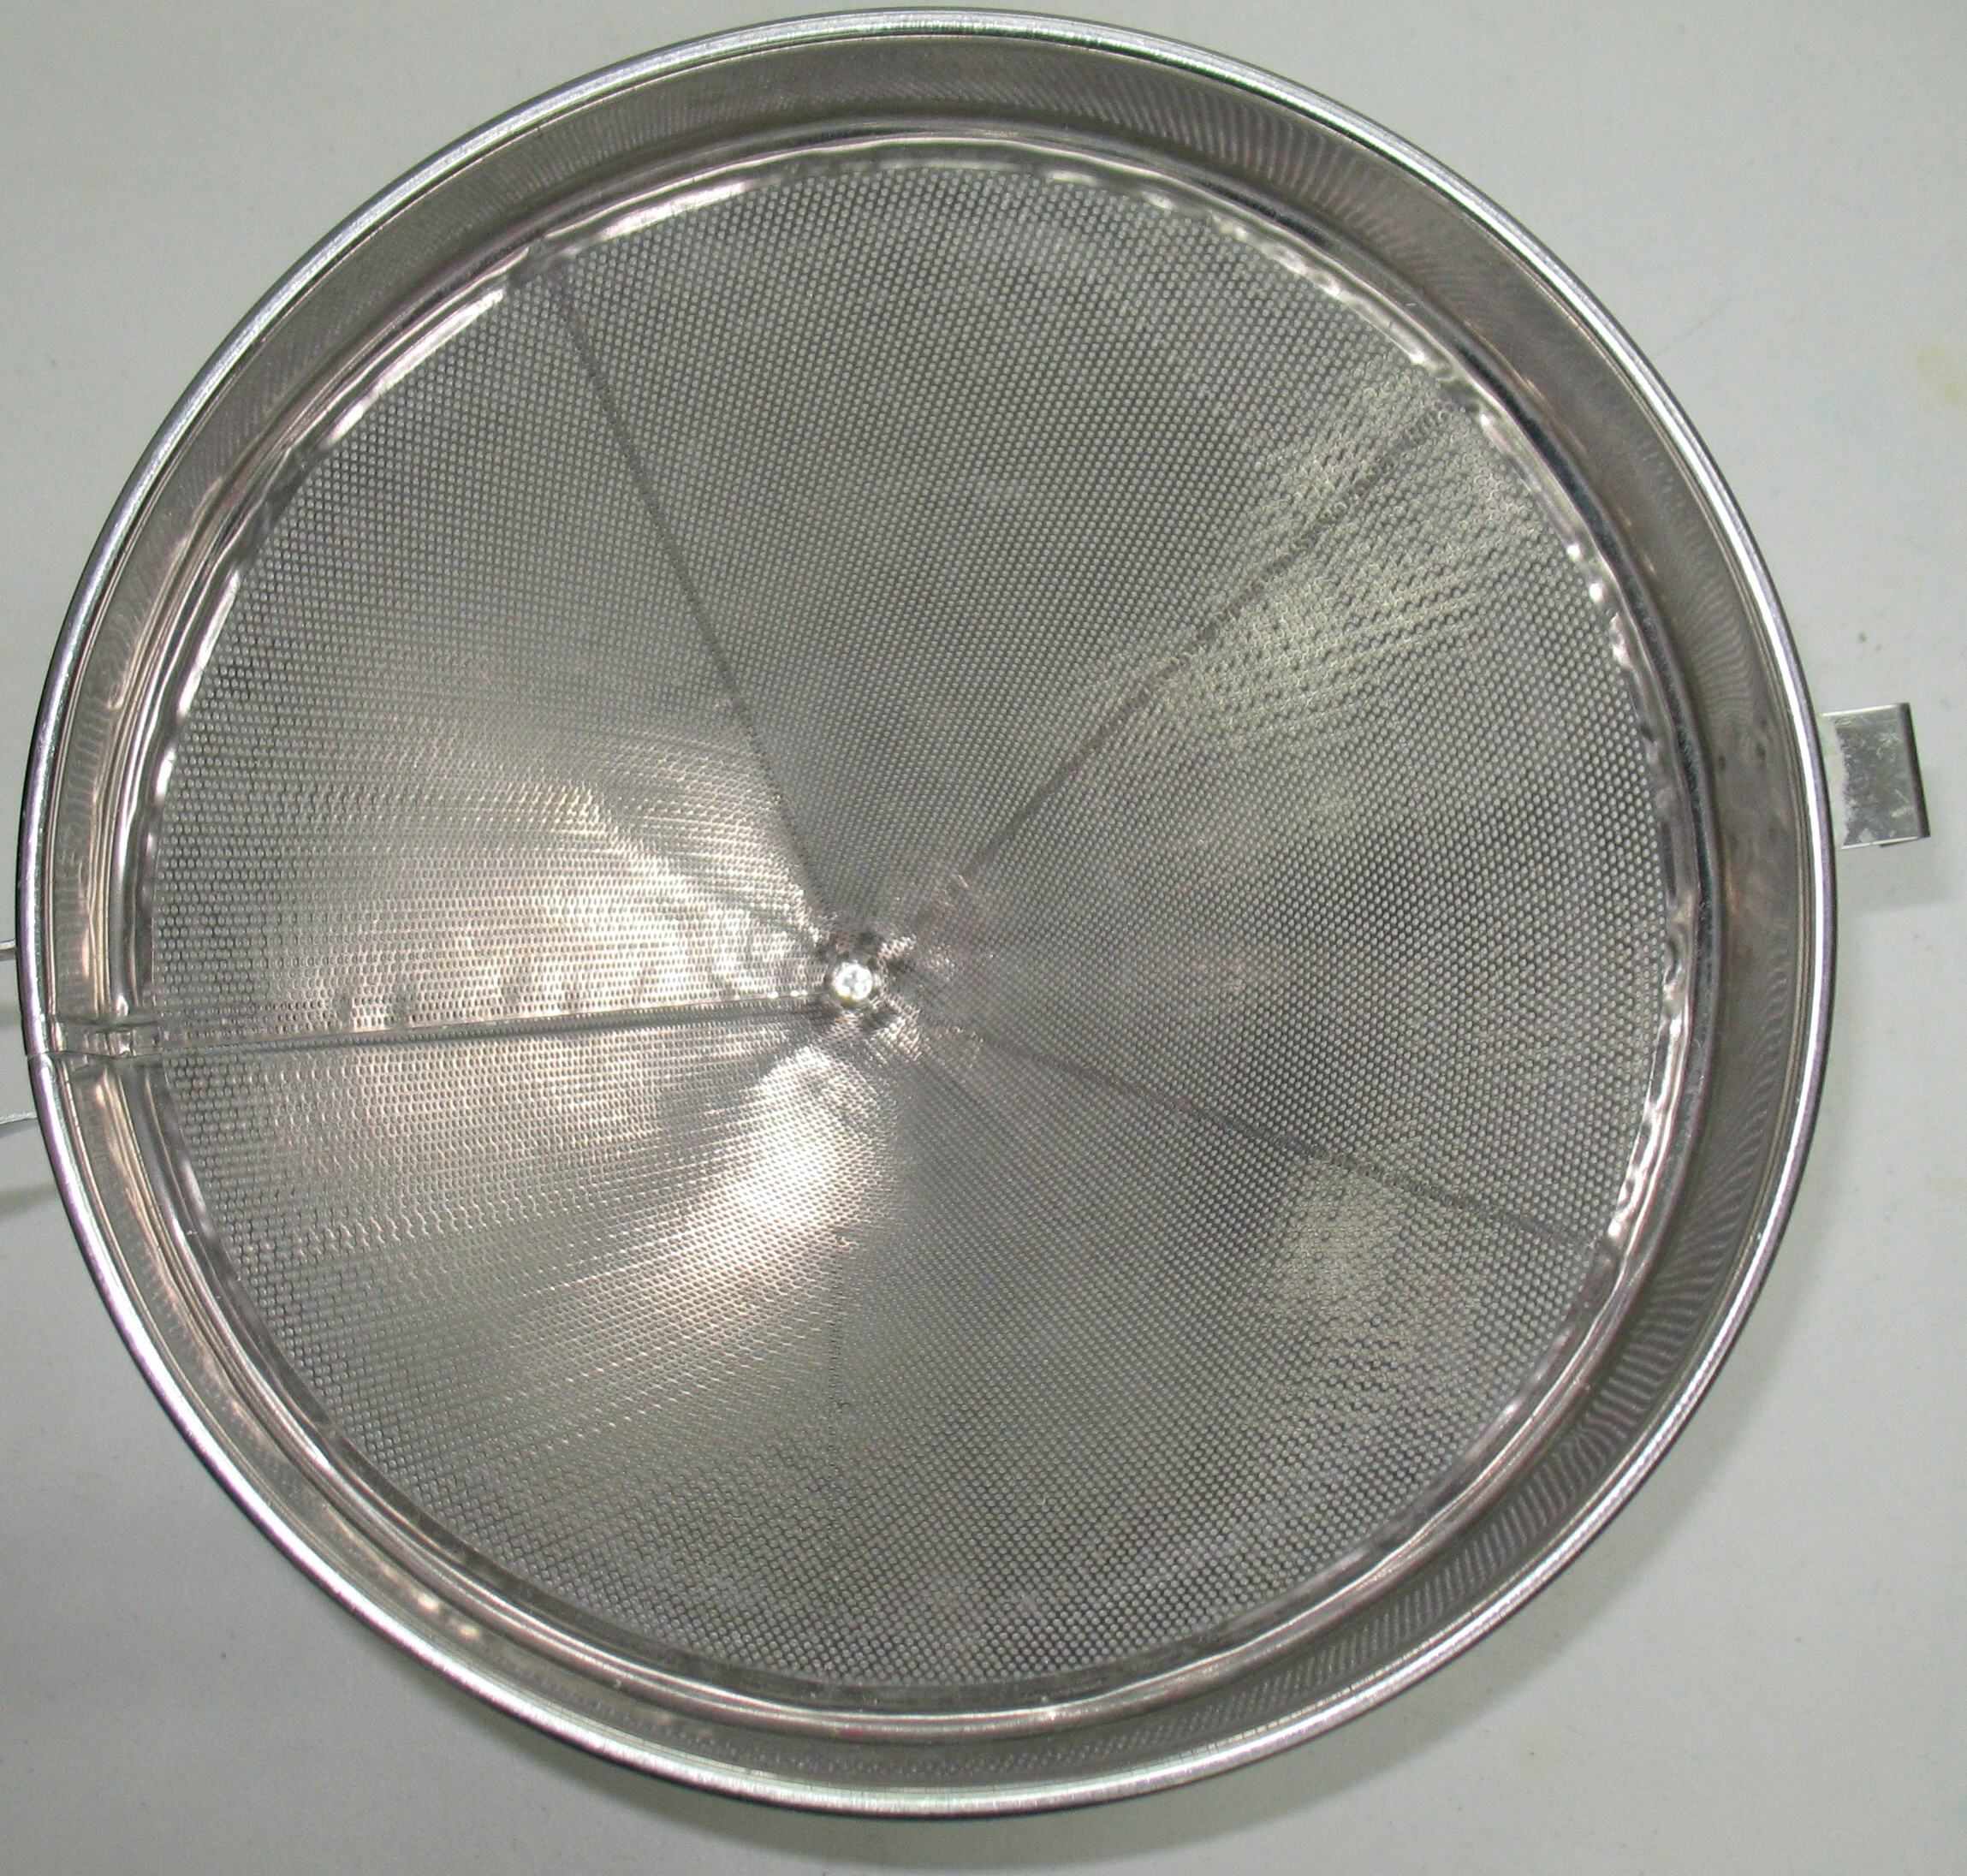 Top view inside the cone of the large strainer